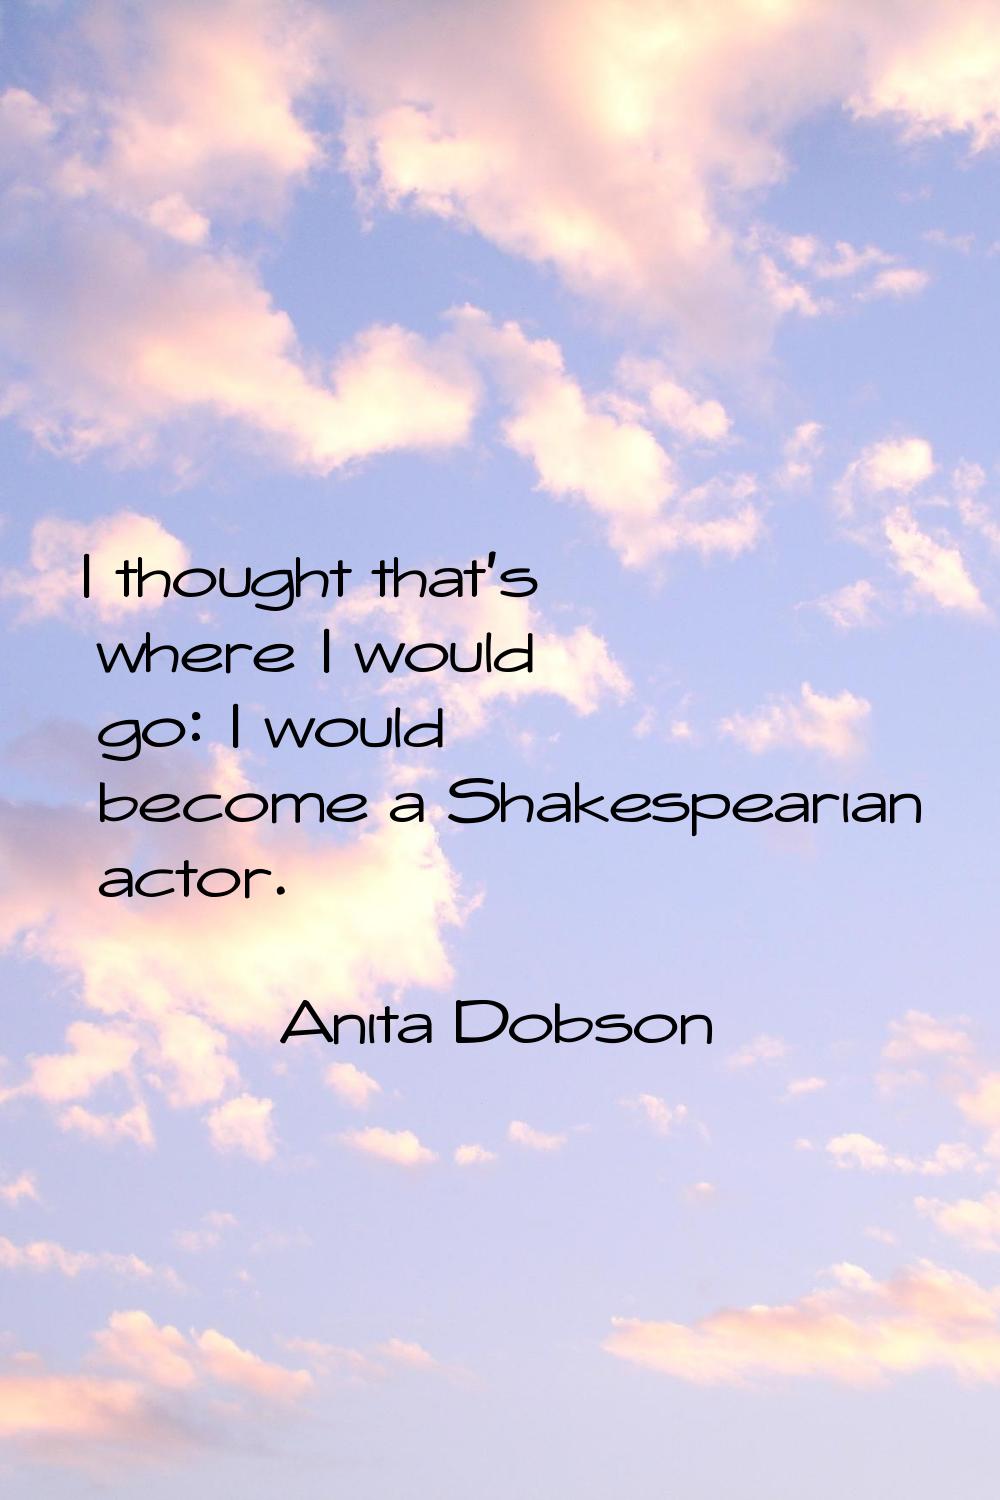 I thought that's where I would go: I would become a Shakespearian actor.